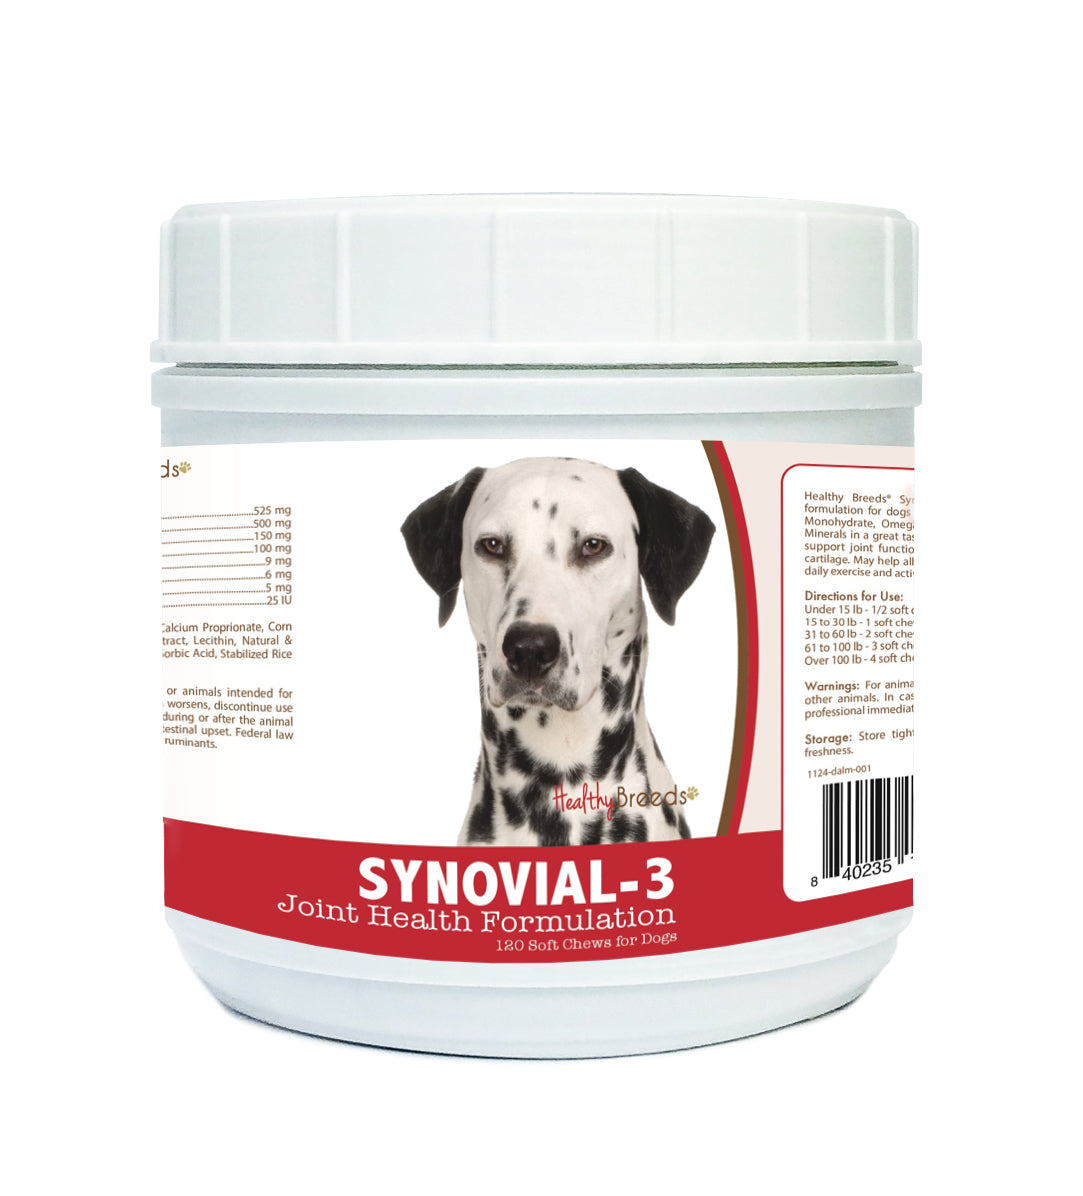 Dalmatian Synovial-3 Joint Health Formulation Soft Chews 120 Count